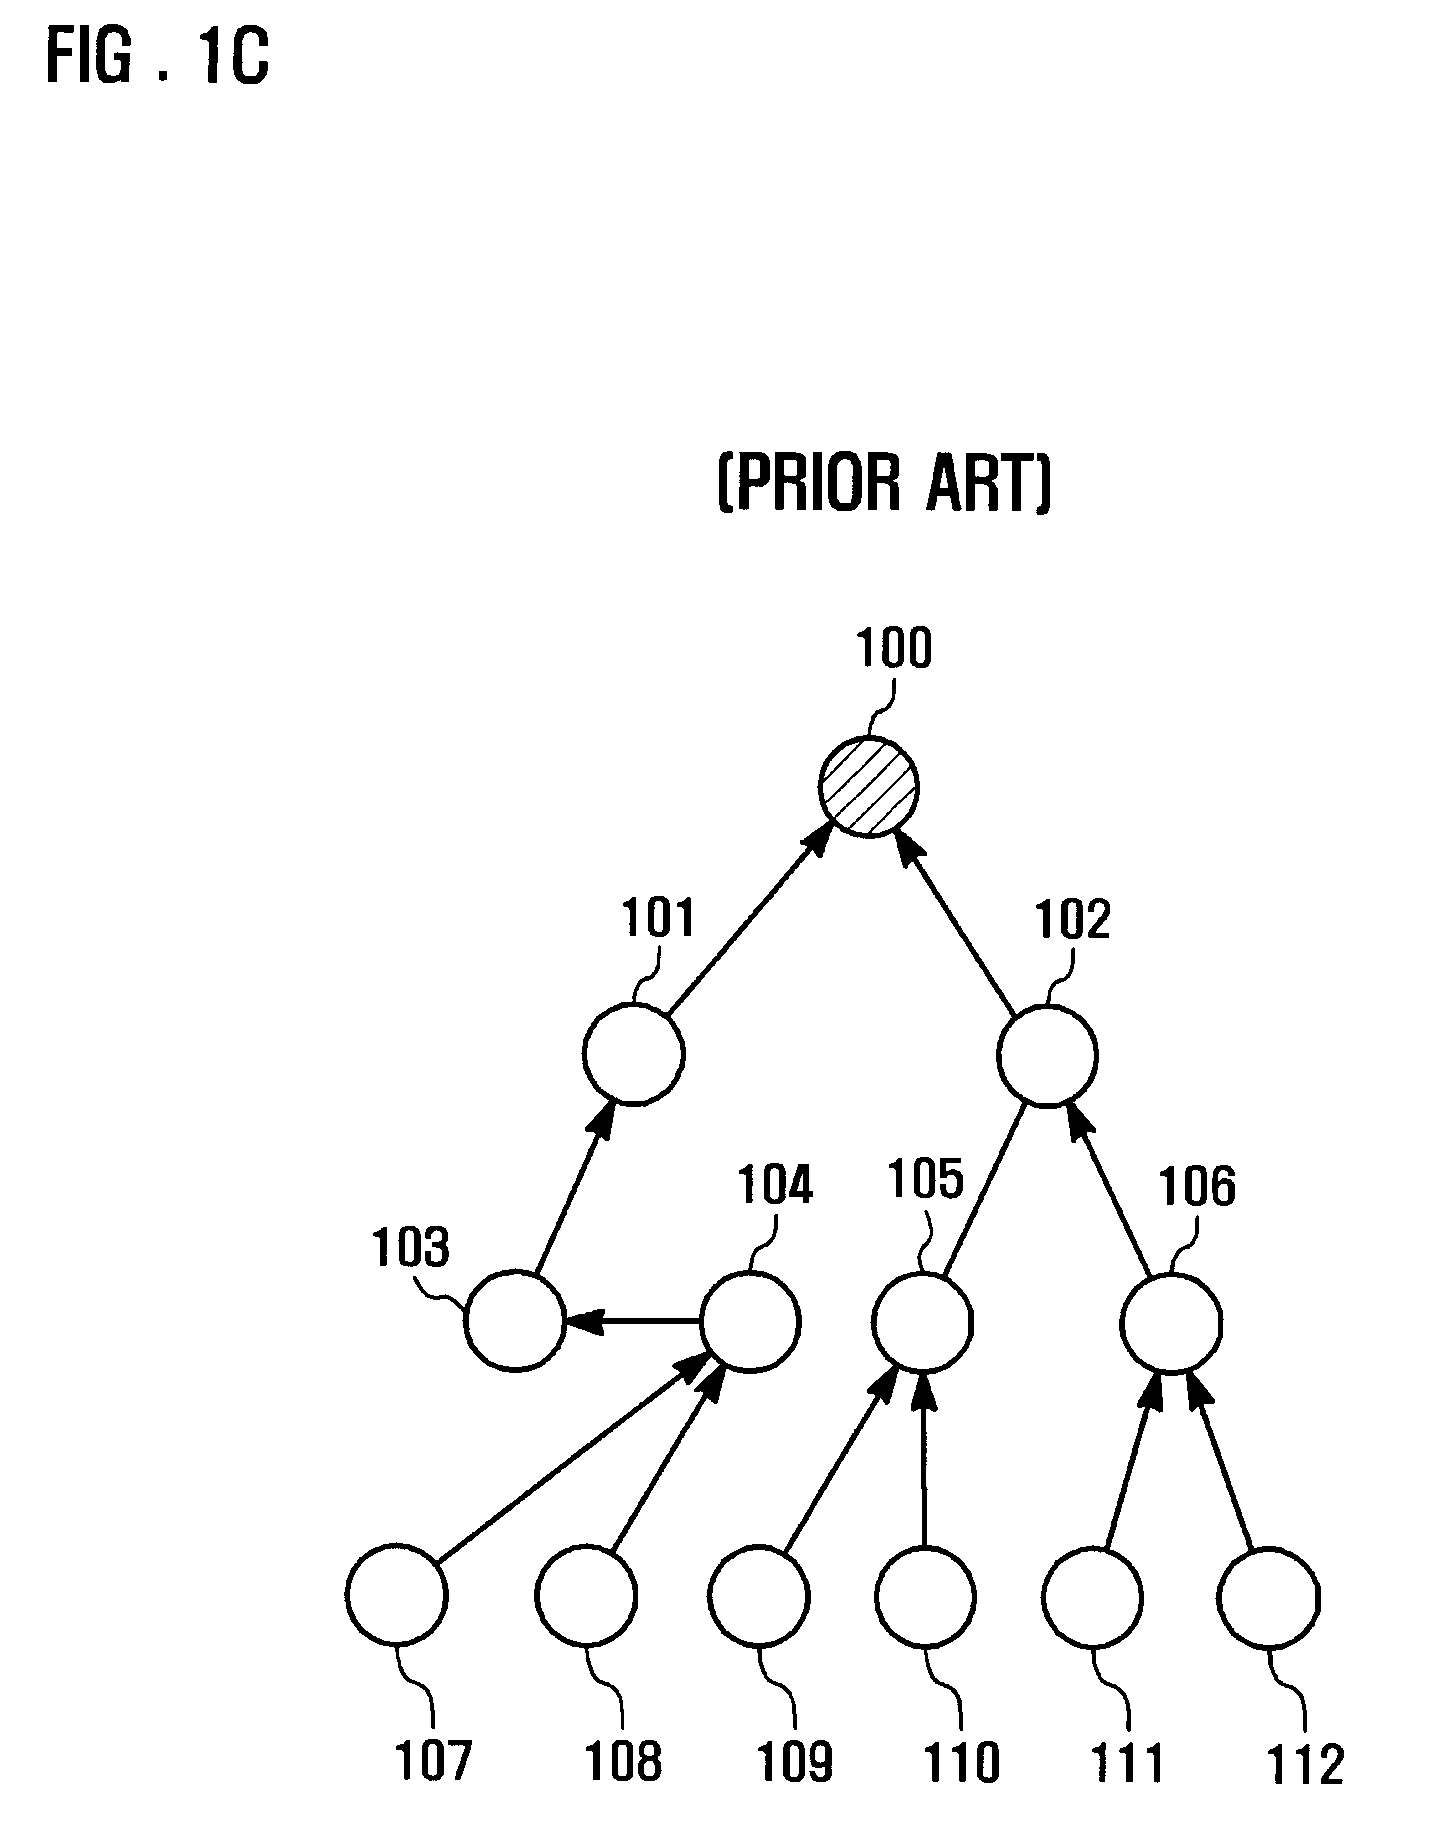 Method and system for detecting suspicious frame in wireless sensor network